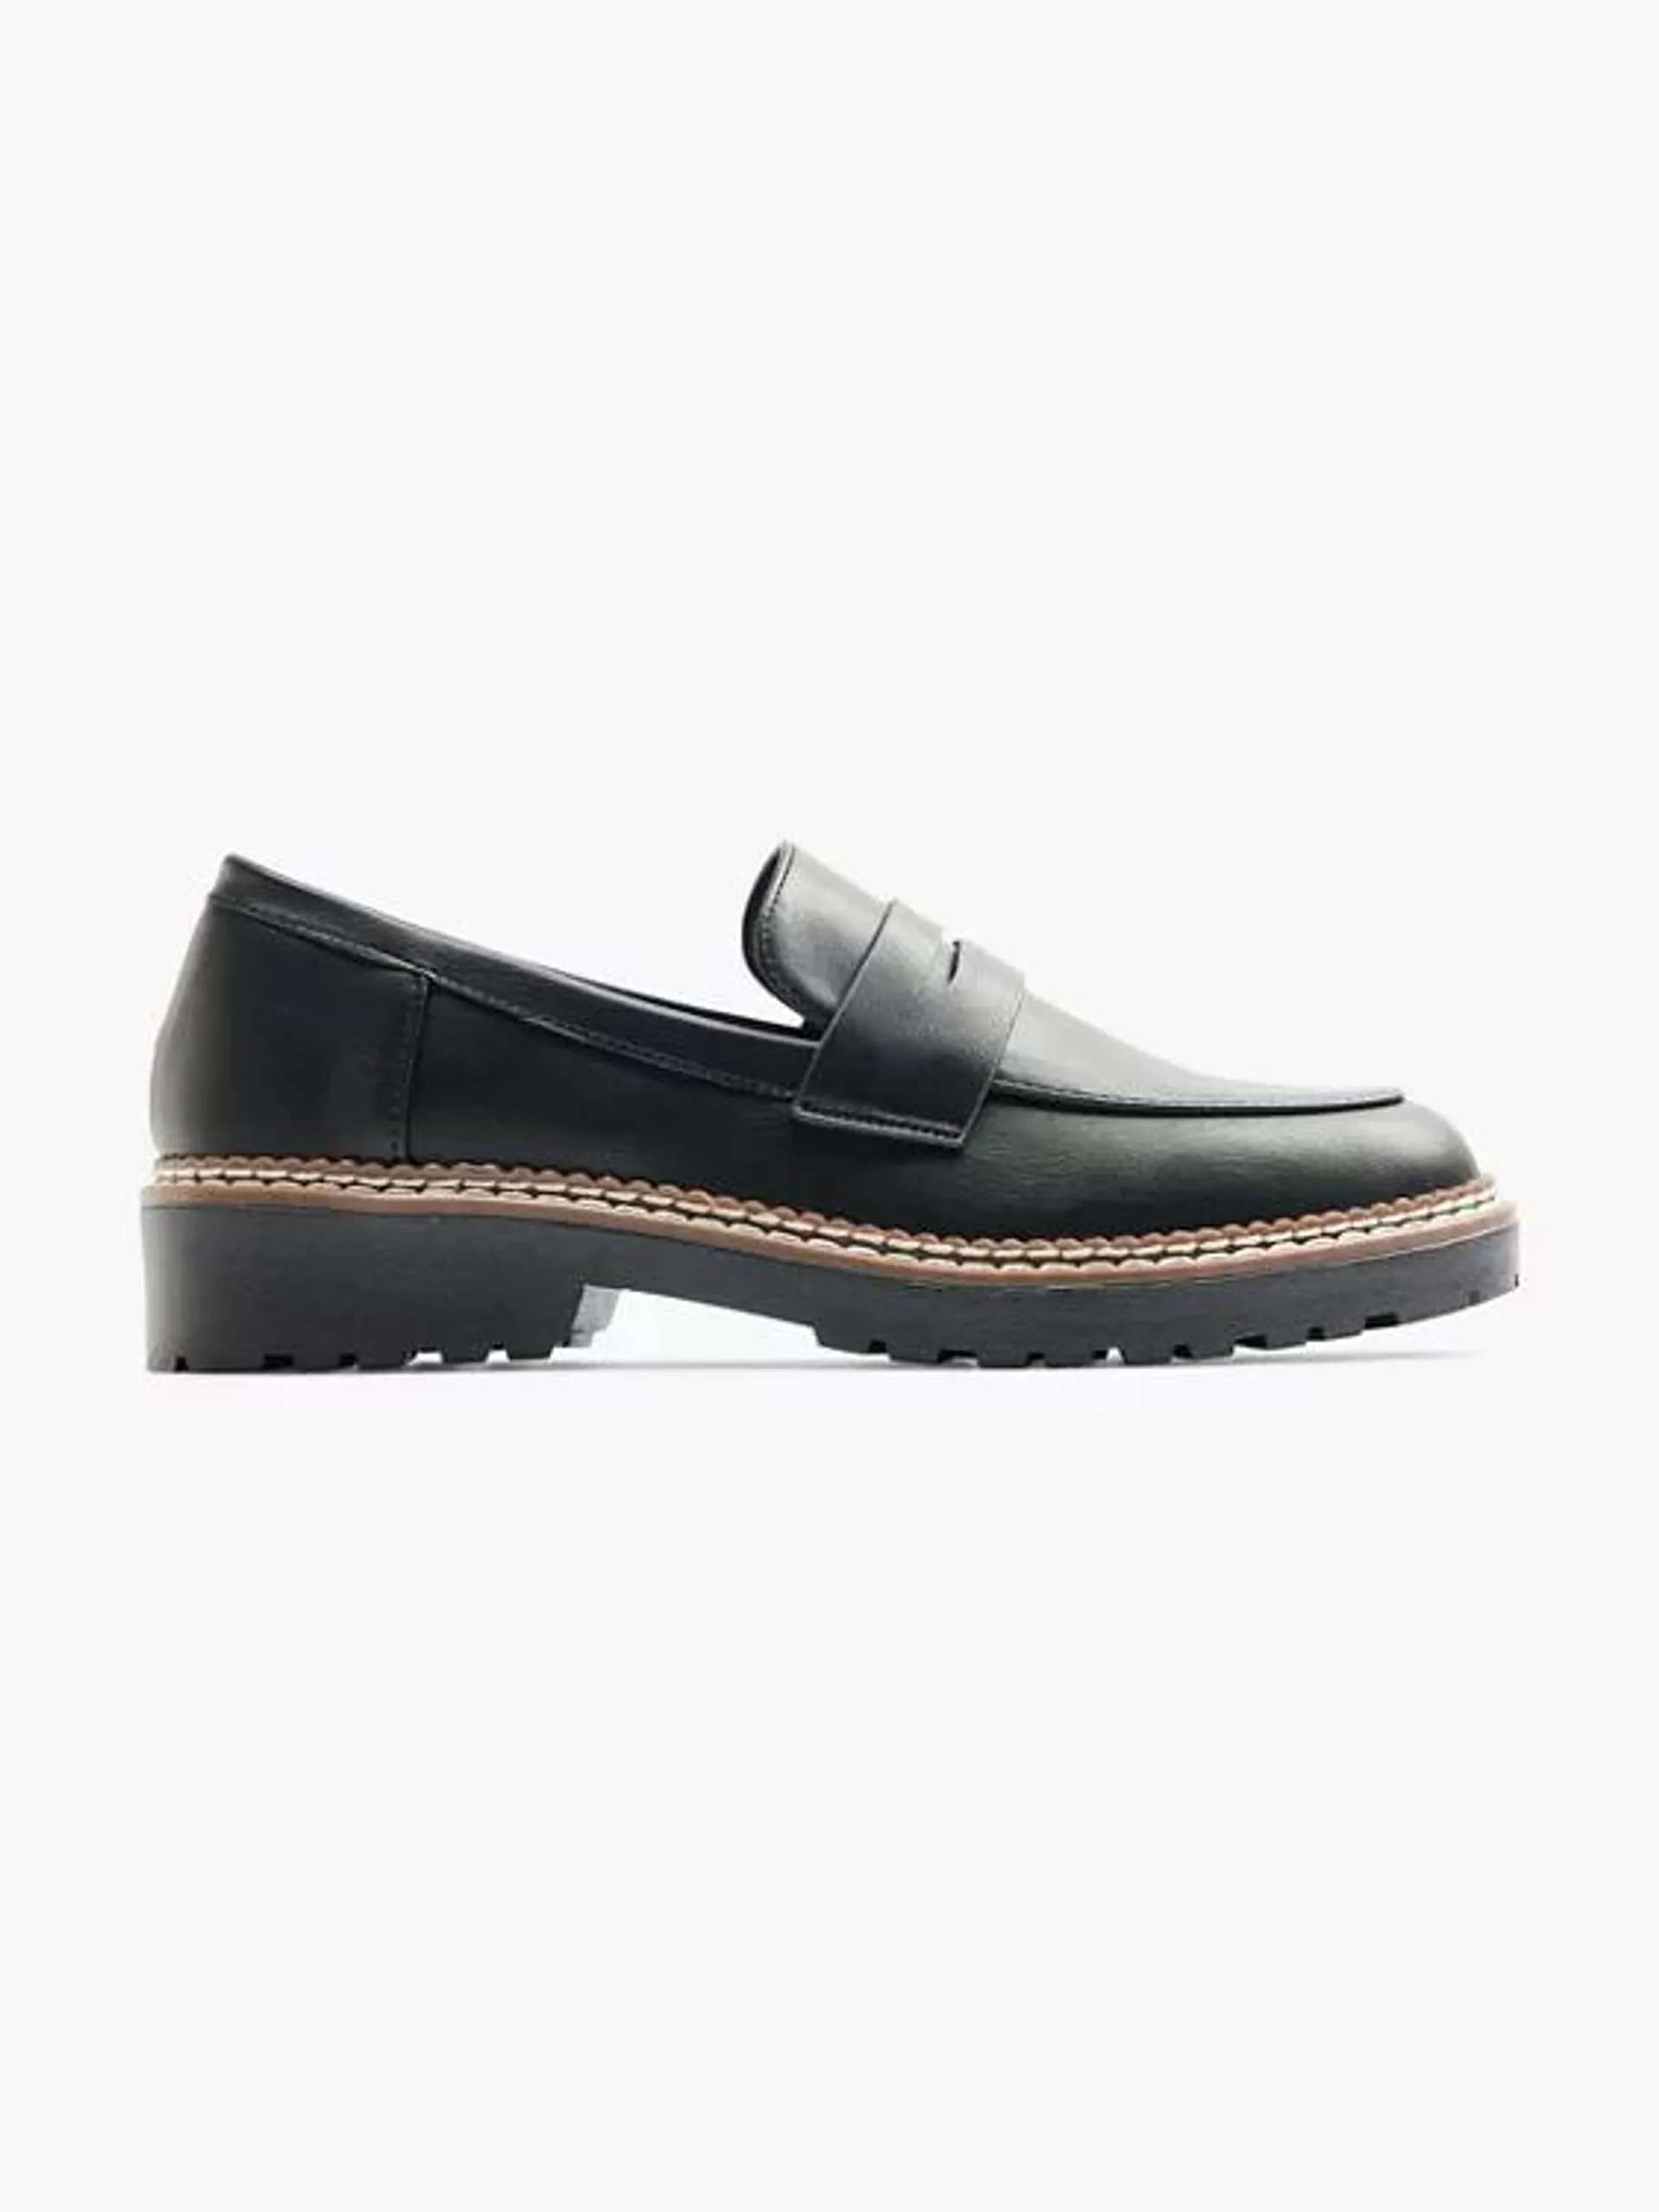 Black Loafer With Contrast Stitching